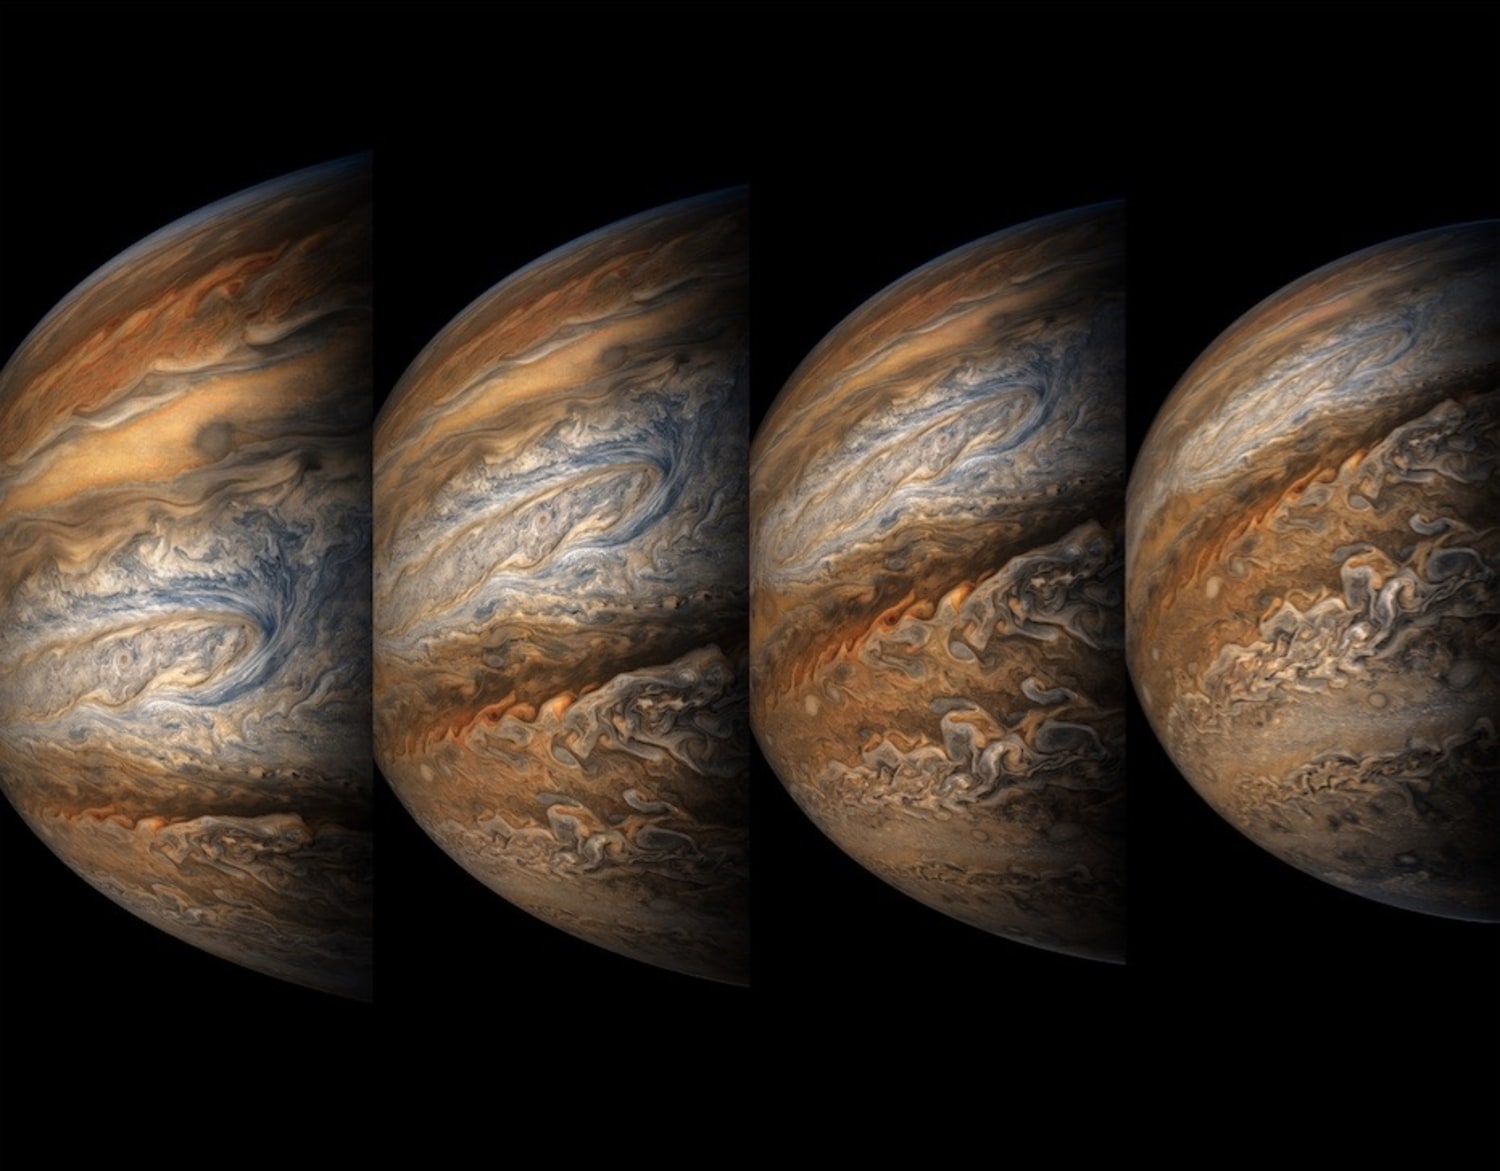 These images of Earth taken by NASA depict how vast our solar system is